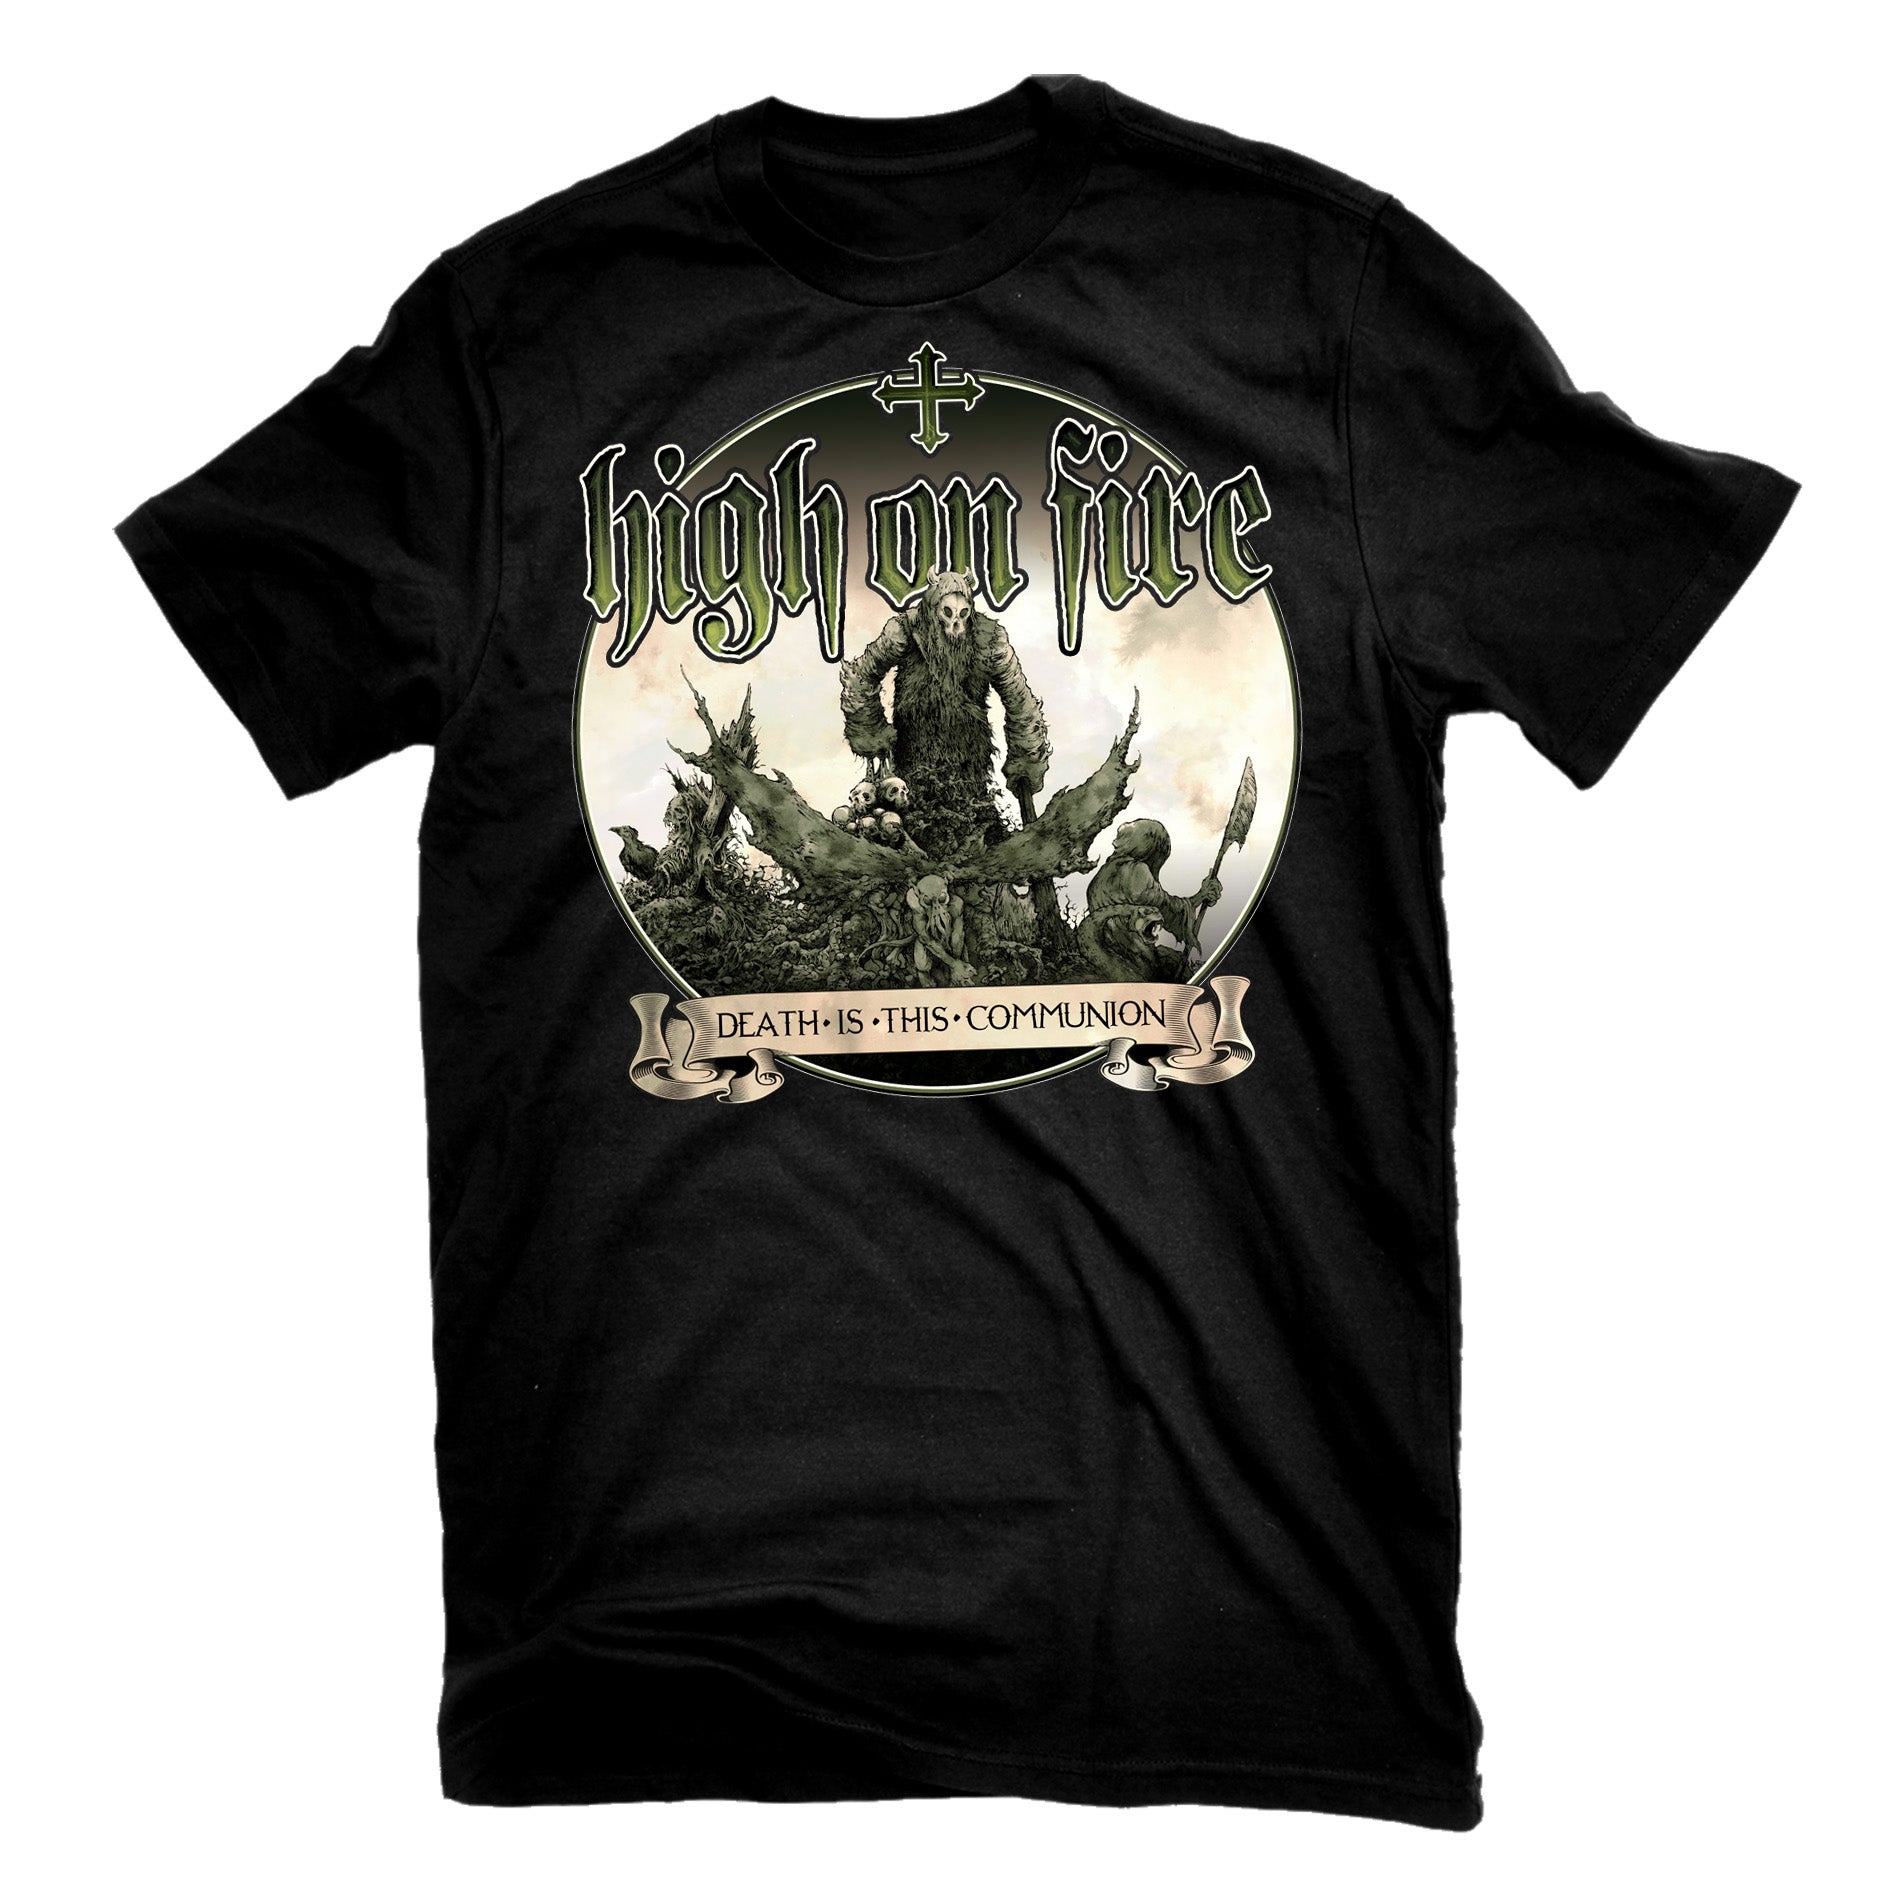 High on Fire "Death Is This Communion" T-Shirt